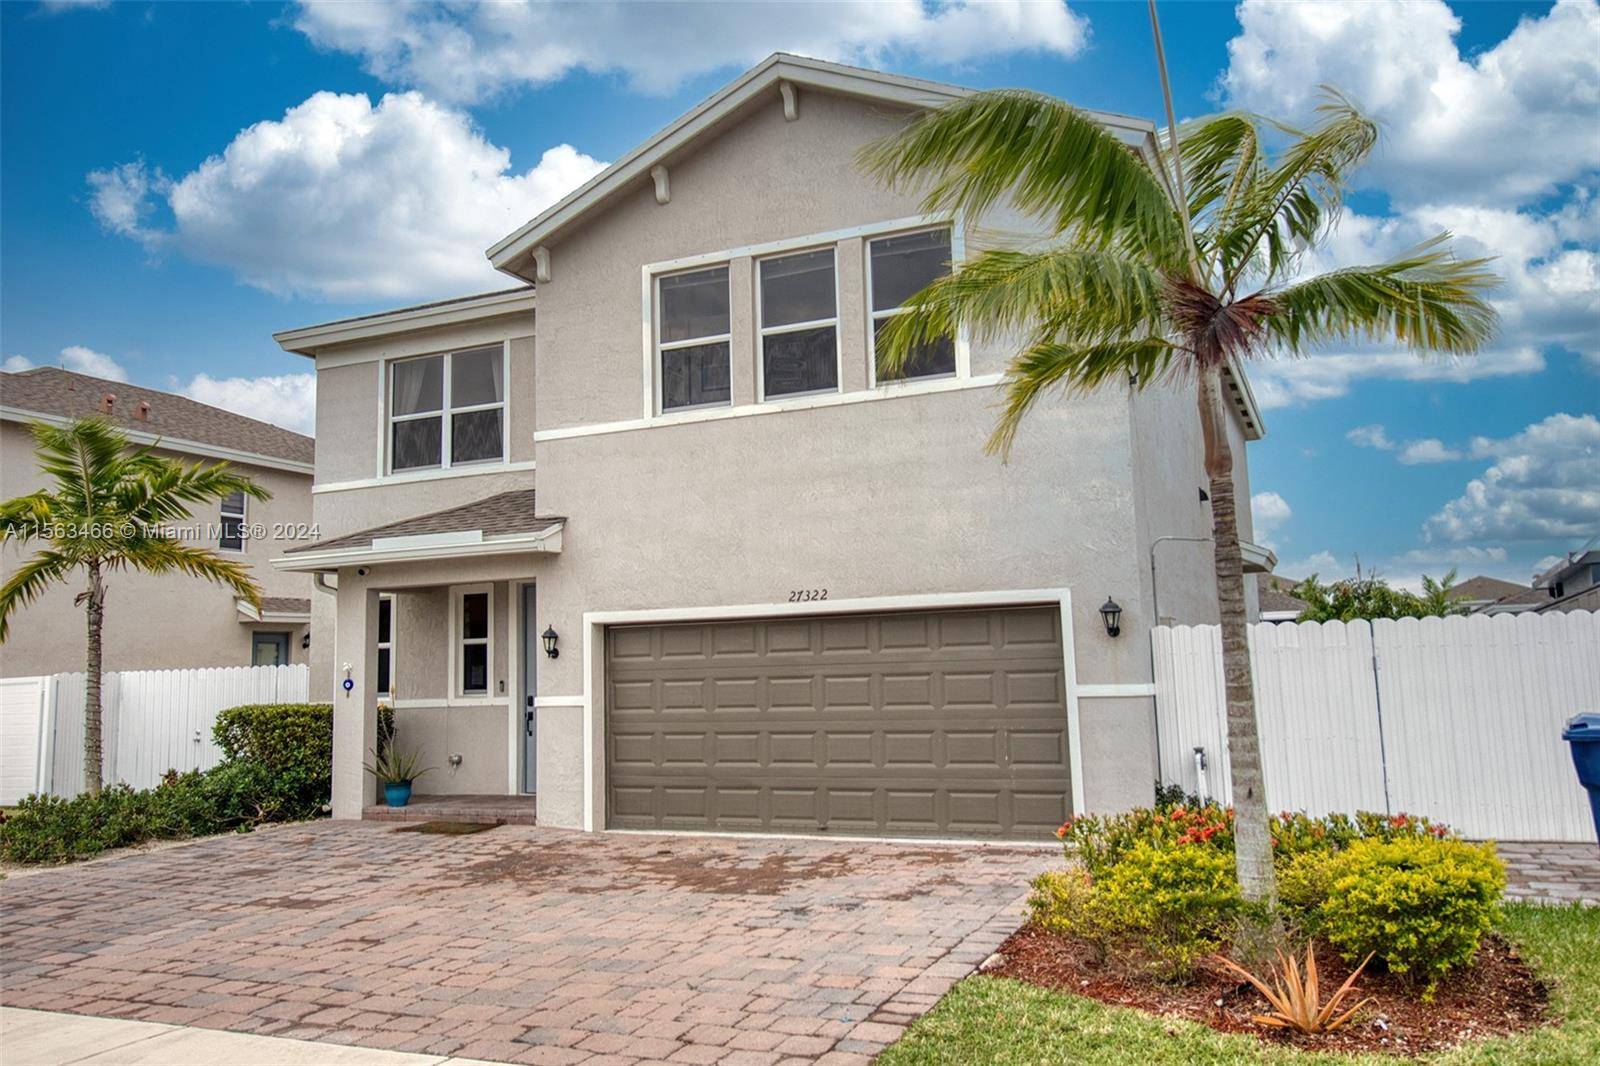 Here we have a beautiful home located in Homestead FL.